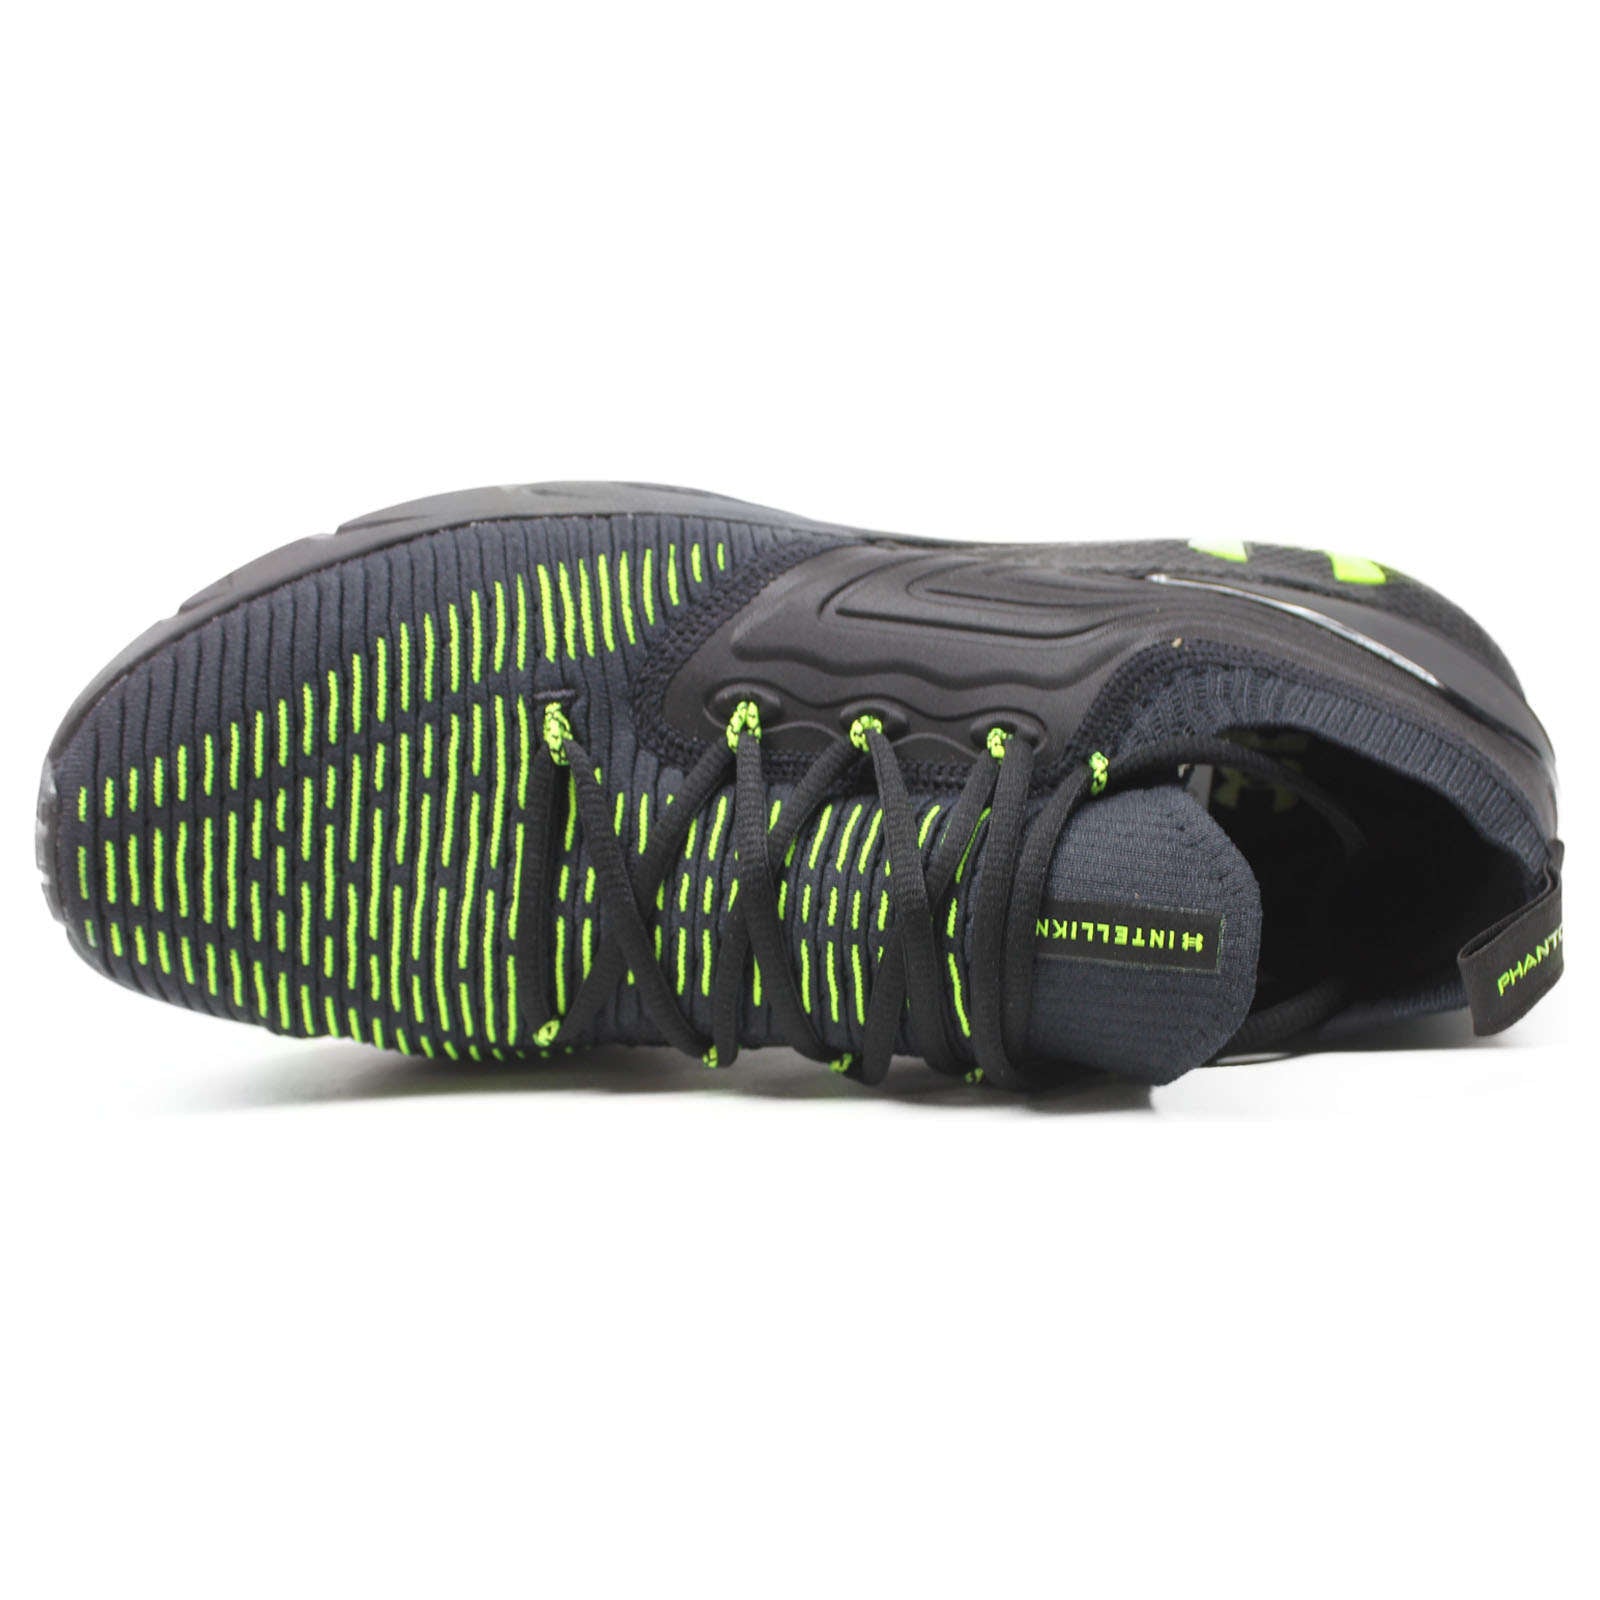 Under Armour HOVR Phantom 2 INKNT Synthetic Textile Men's Low-Top Trainers#color_black yellow